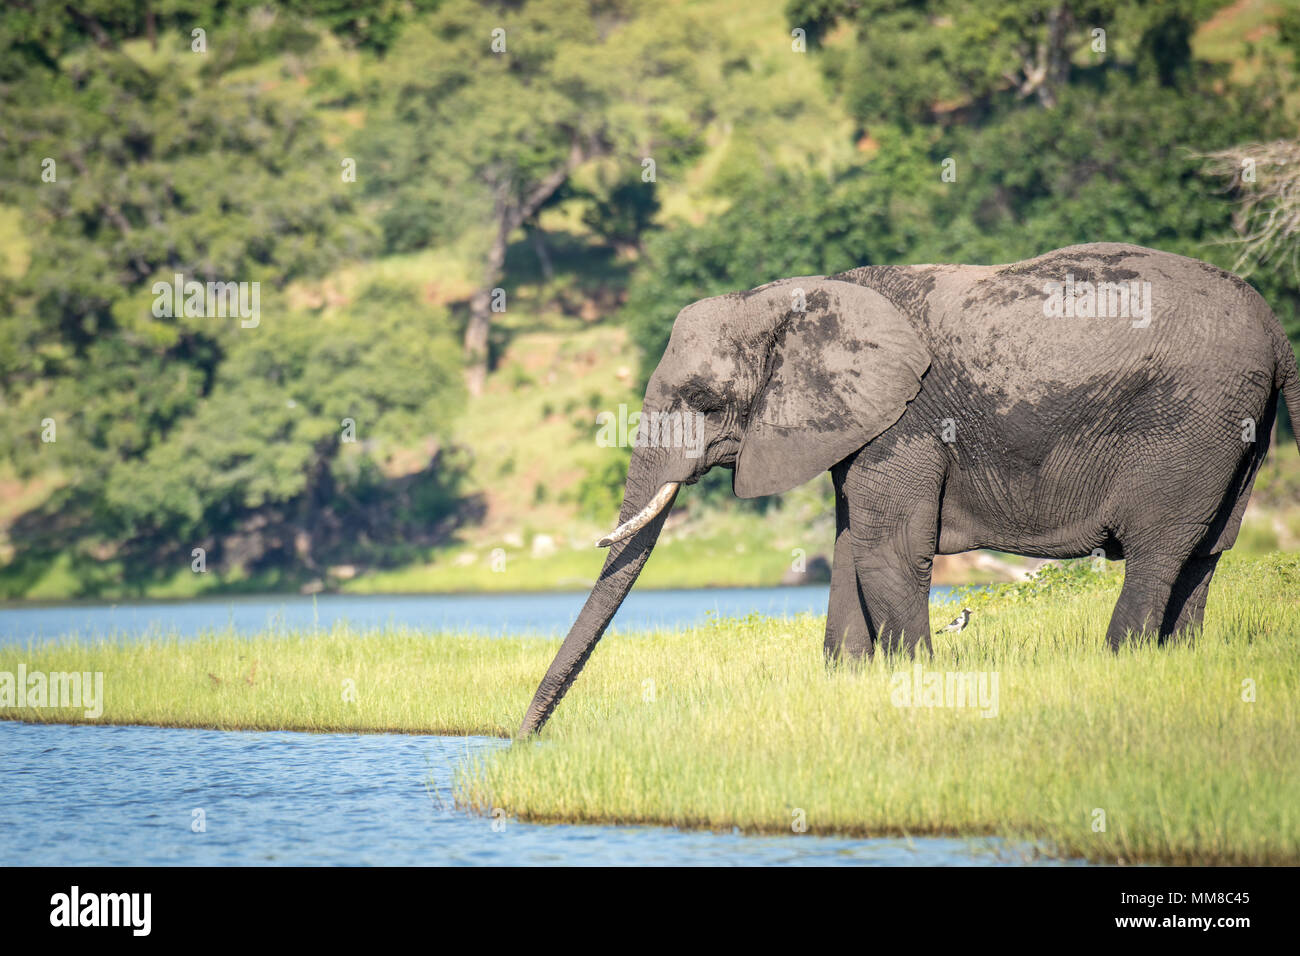 An elephant uses its long, powerful trunk to take a drink from the Chobe River. Chobe National Park - Botswana Stock Photo